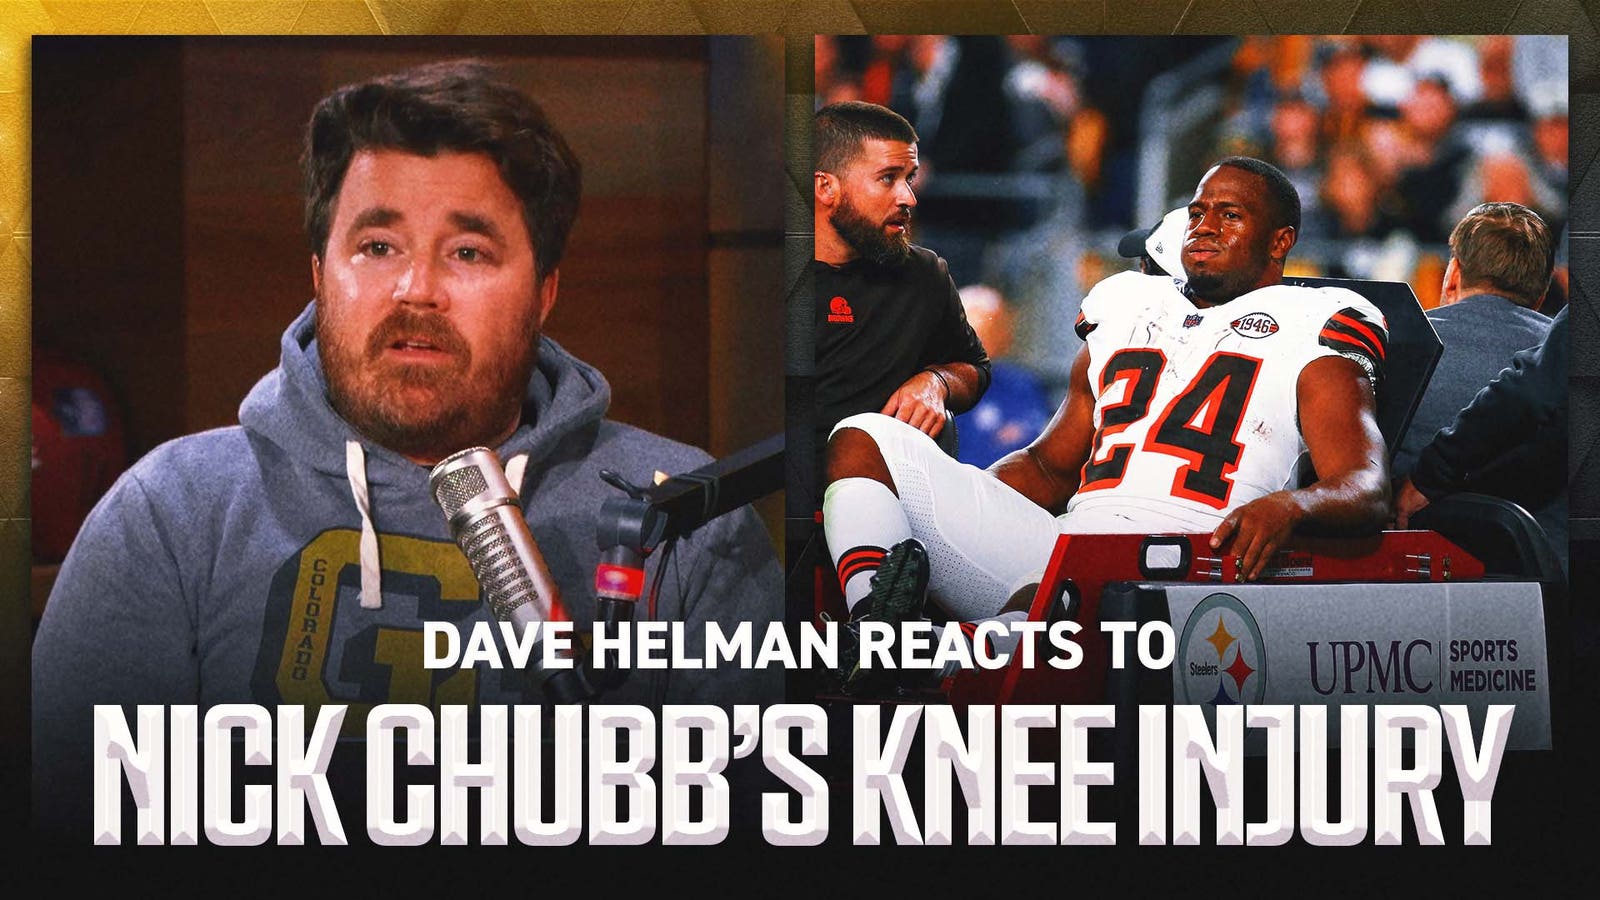 Dave Helman reacts to Nick Chubb's crushing injury in Browns' loss to the Steelers 